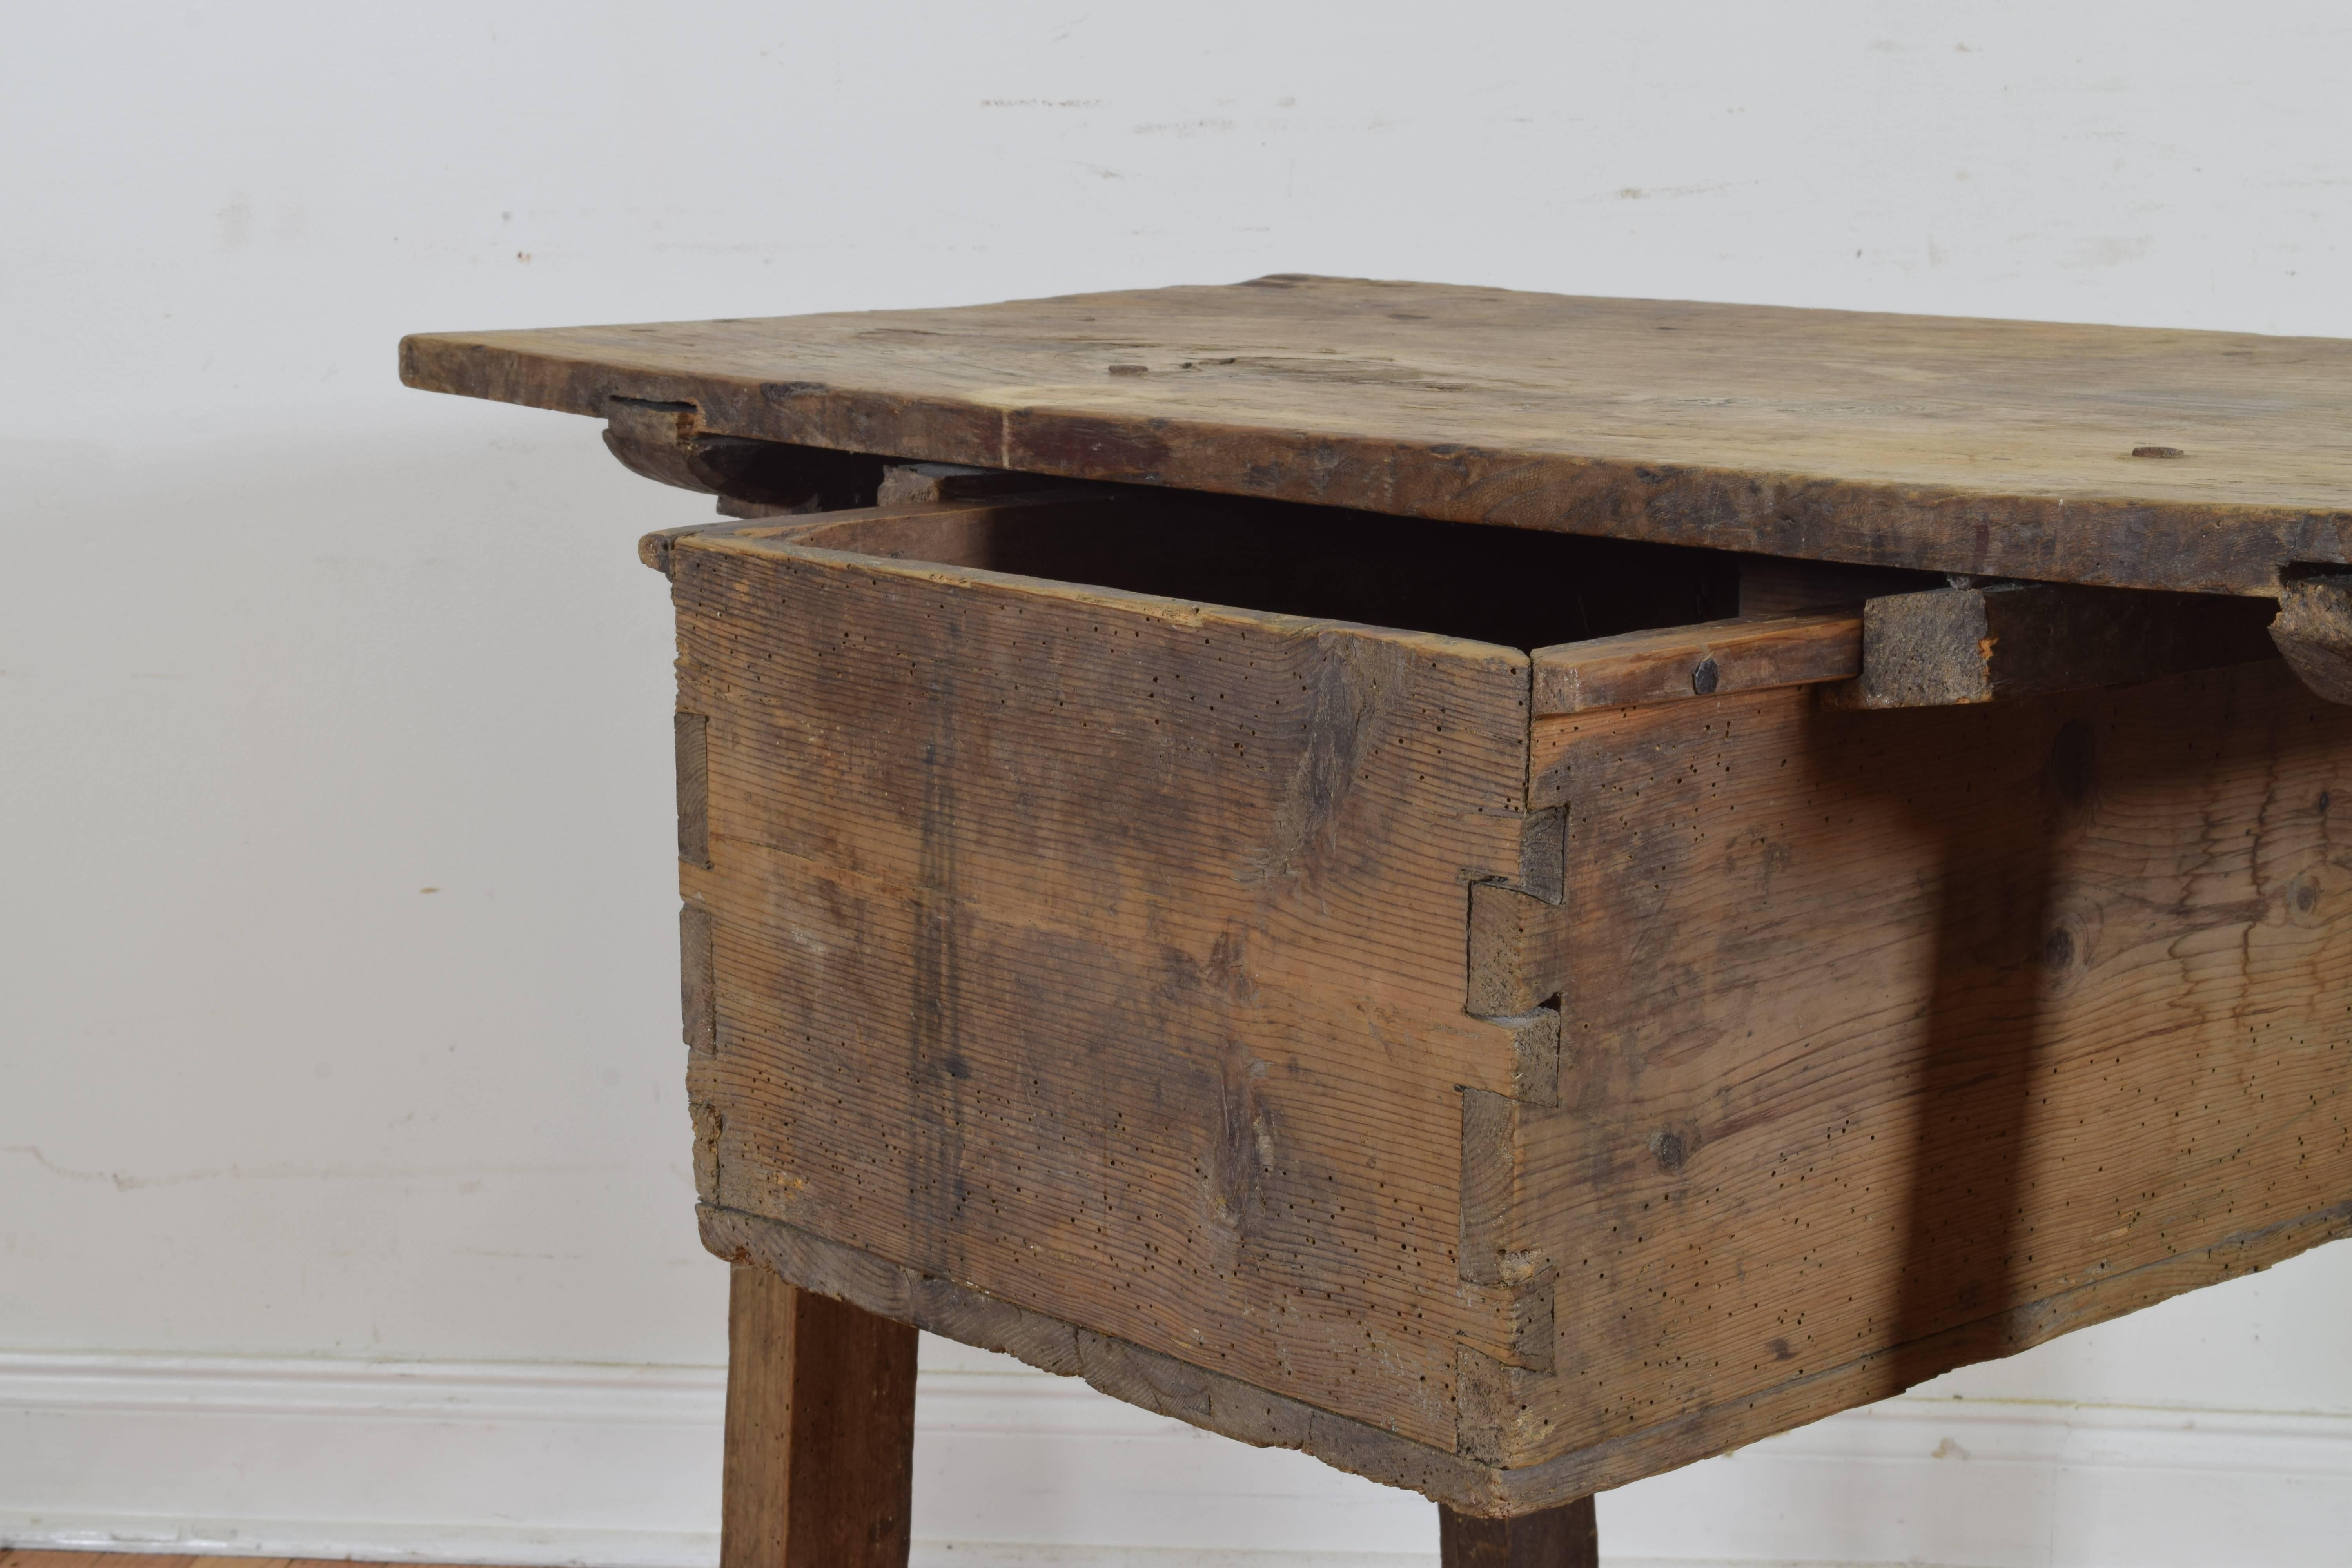 Spanish Late Baroque Period Upland Pinewood One-Drawer Table, 17th-18th Century 2